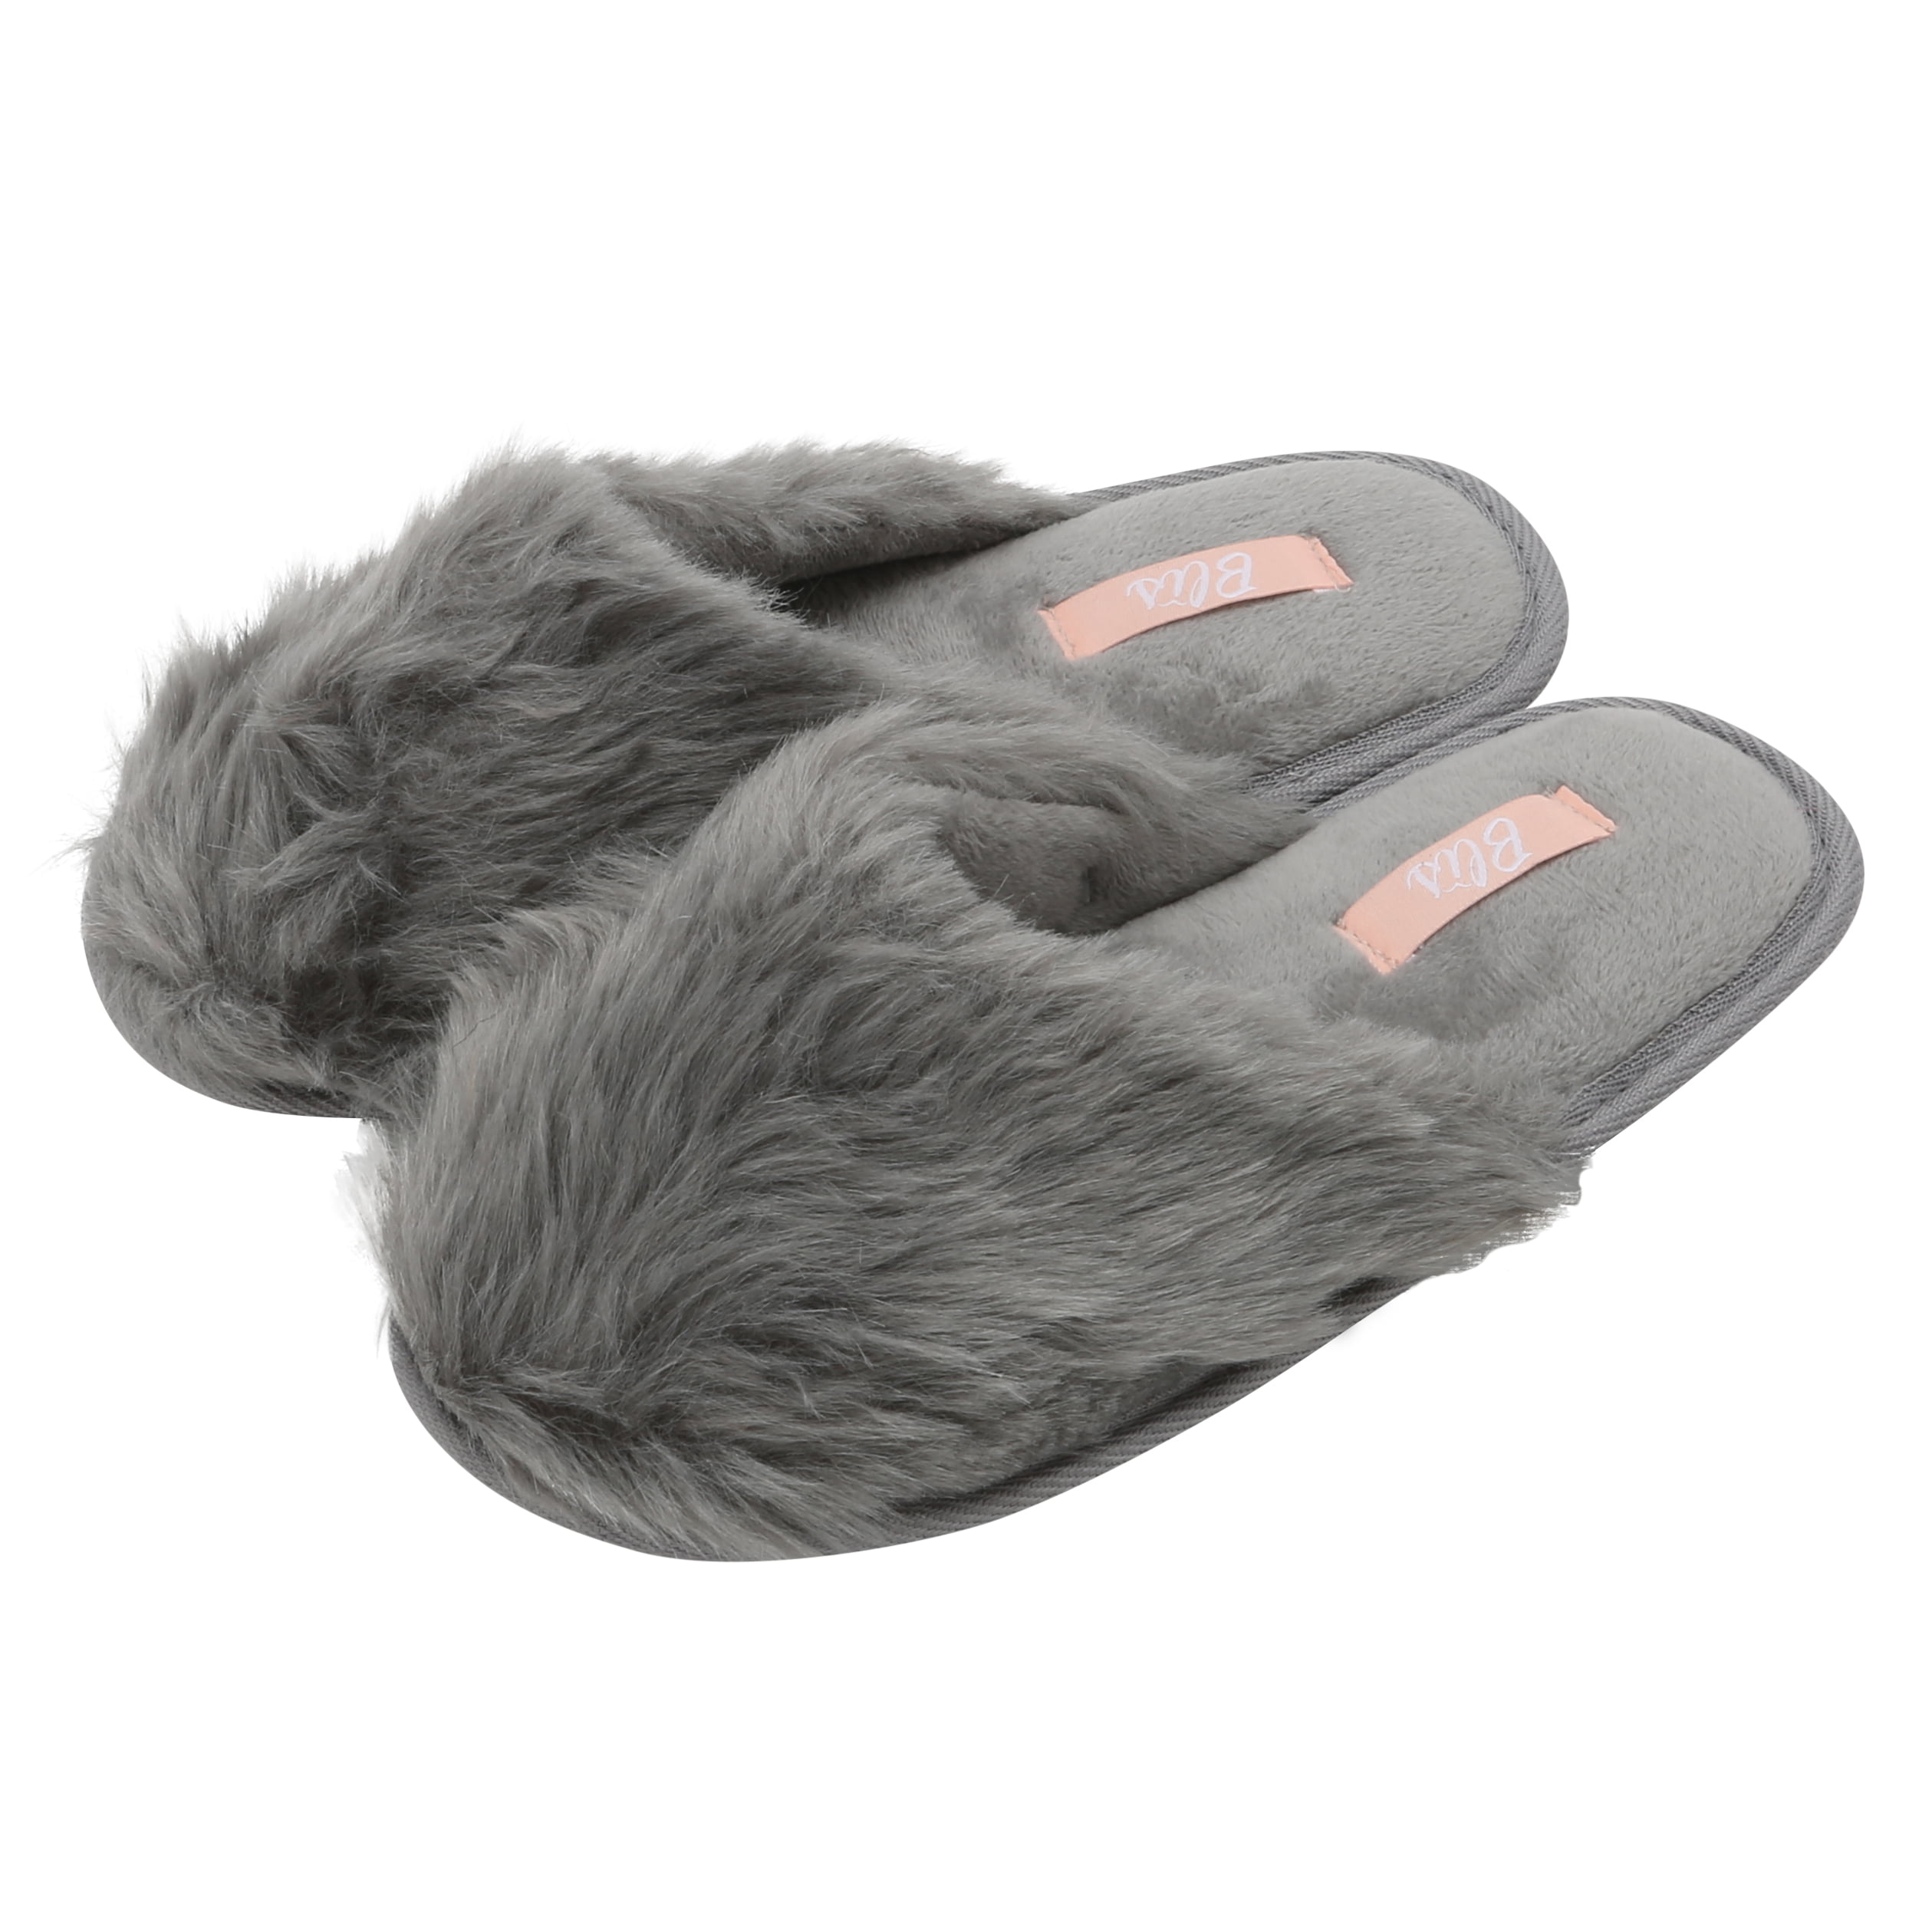 bed slippers